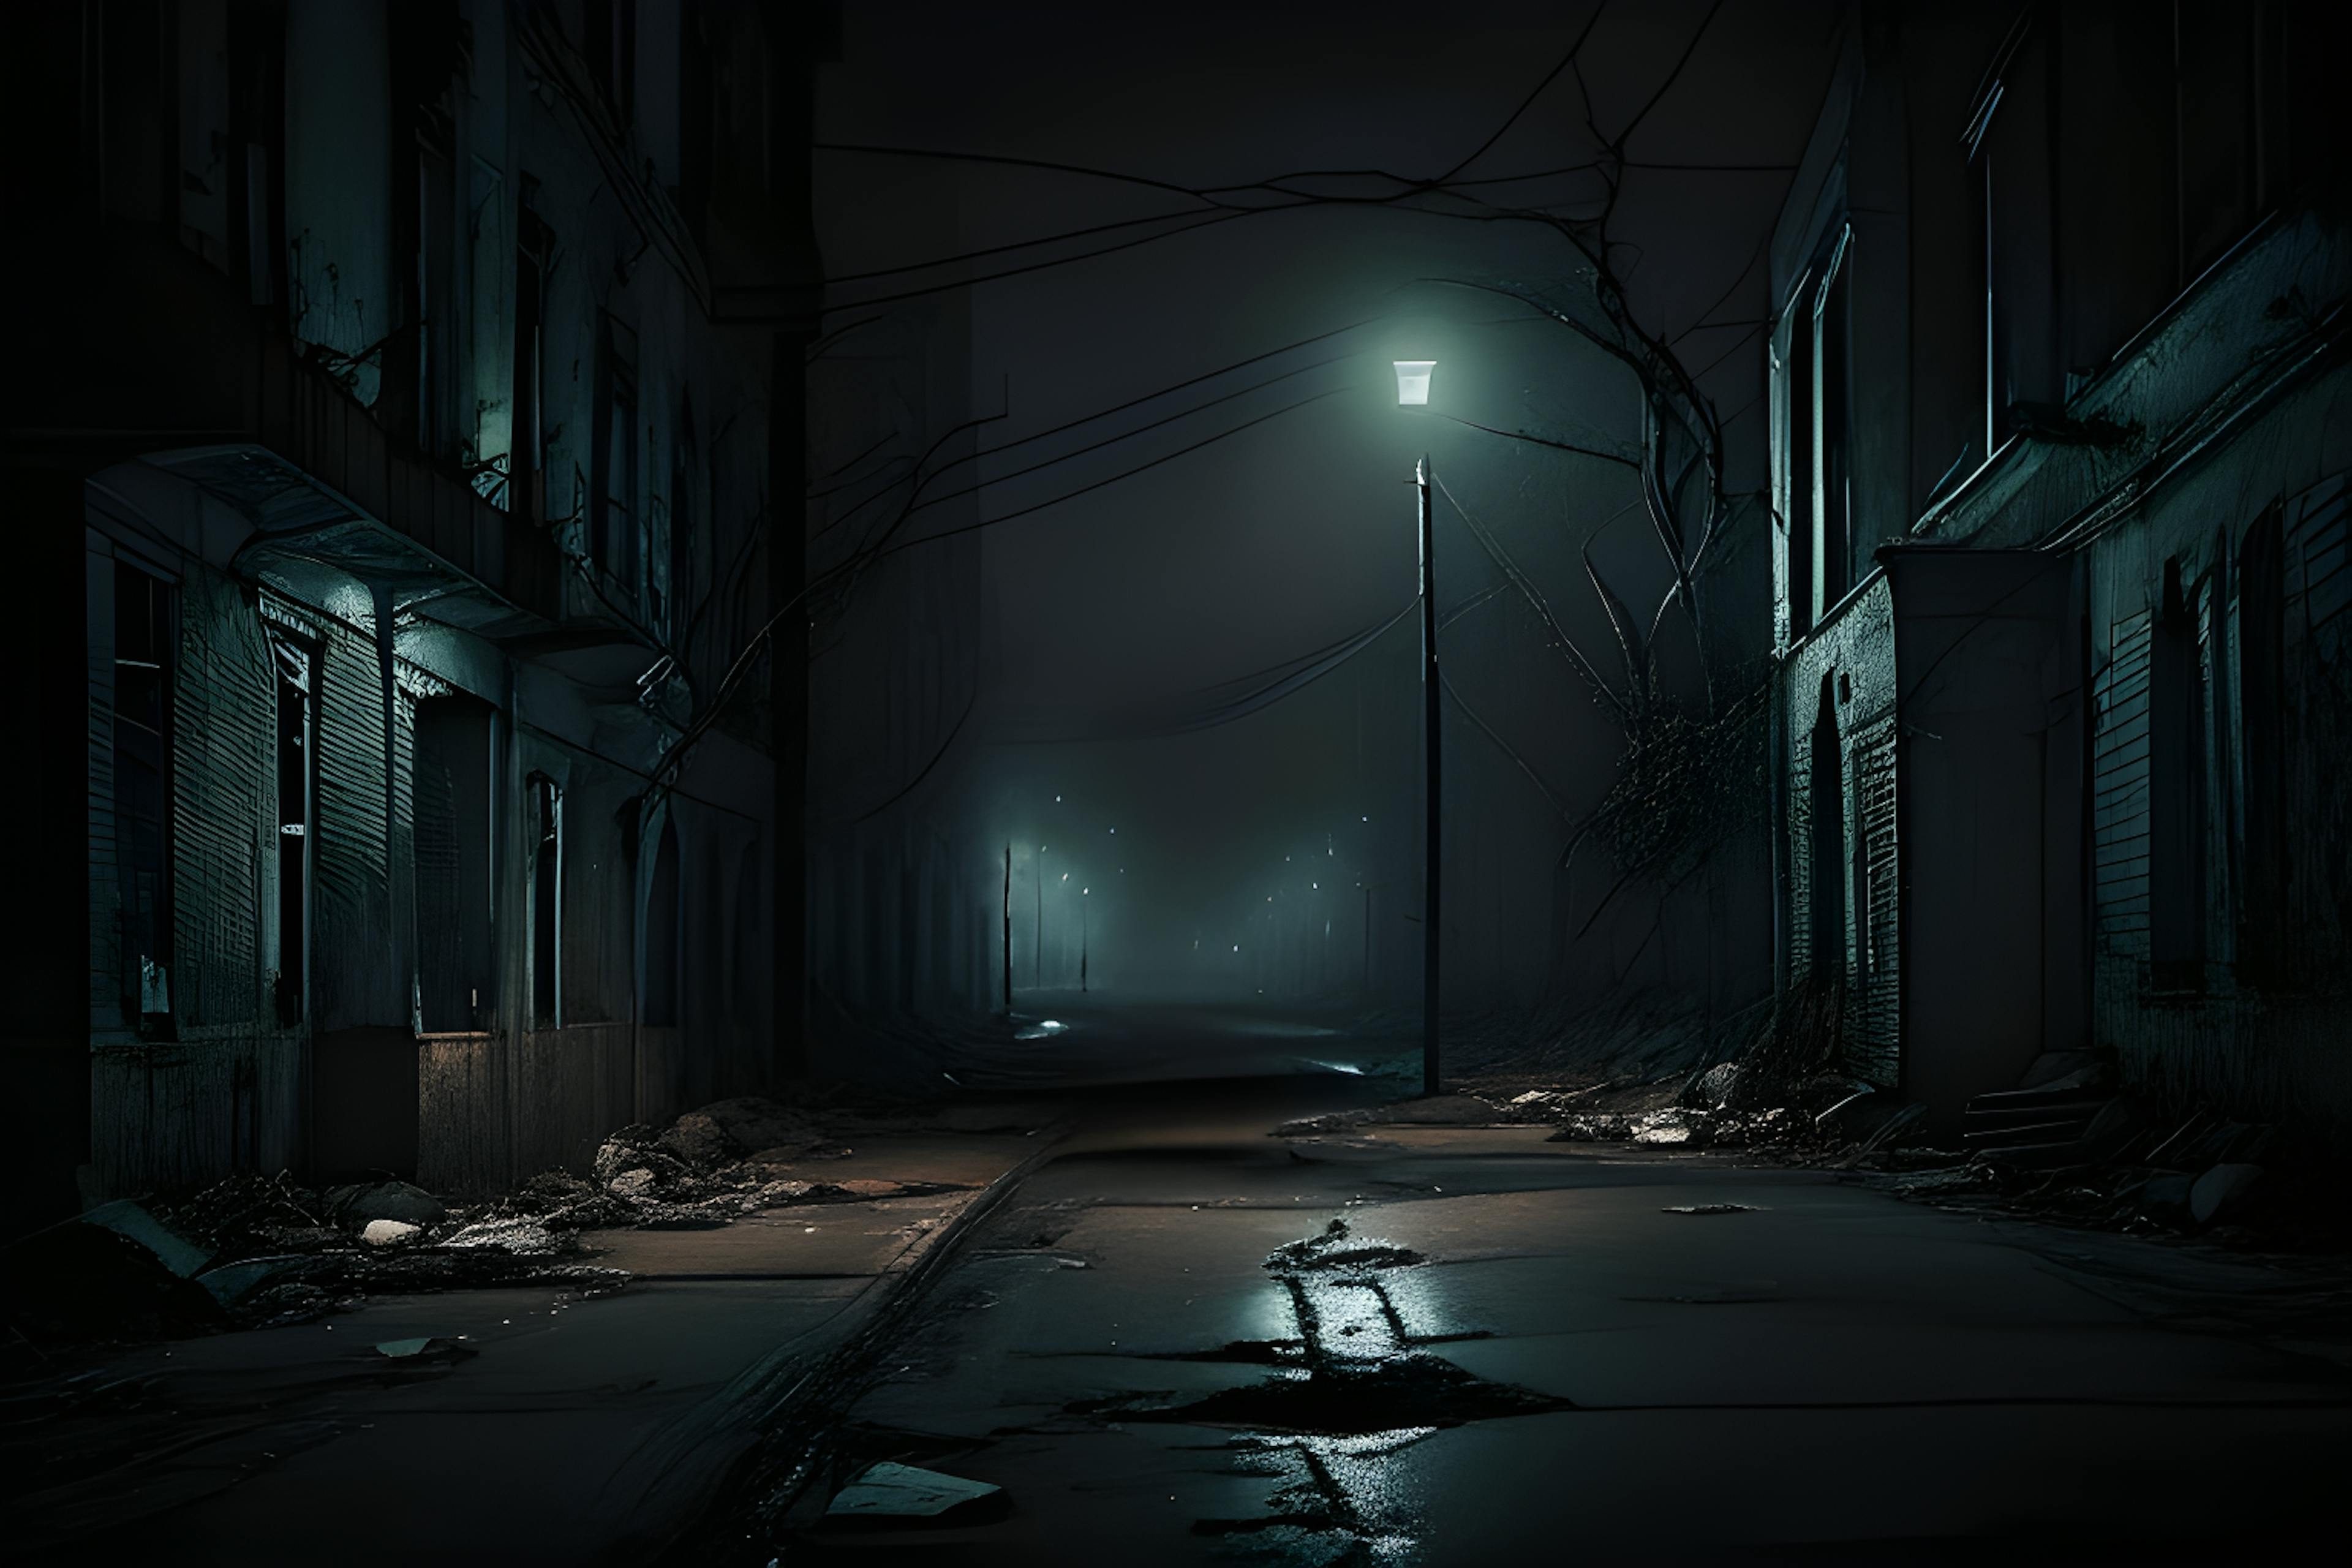 This image was generated by HackerNoon's AI Image Generator via the prompt "a dark abandoned street at night with broken streetlights".